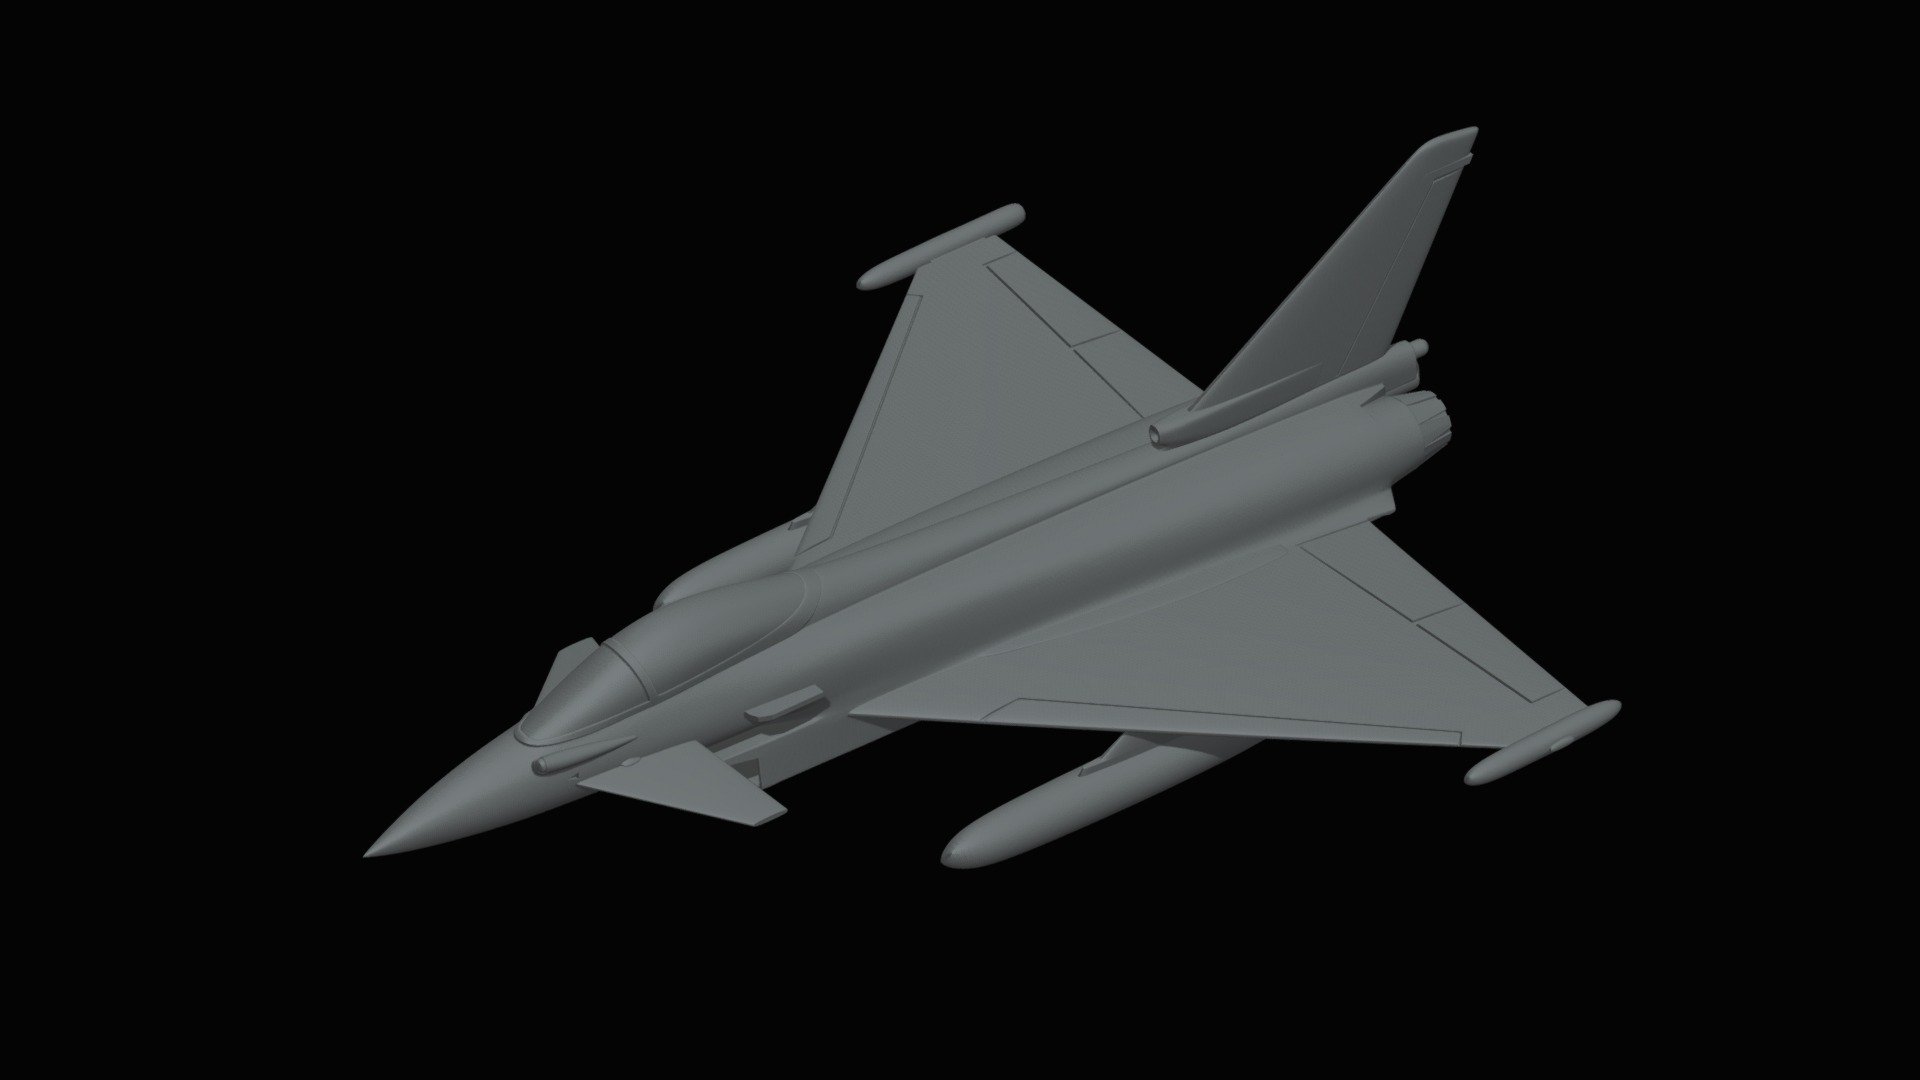 If you are interested to buy this model, you can purchase it here:

https://cults3d.com/en/users/veetrapro/3d-models - EUROFIGHTER TYPHOON 3D PRINT READY STL FILES - 3D model by veetrapro 3d model